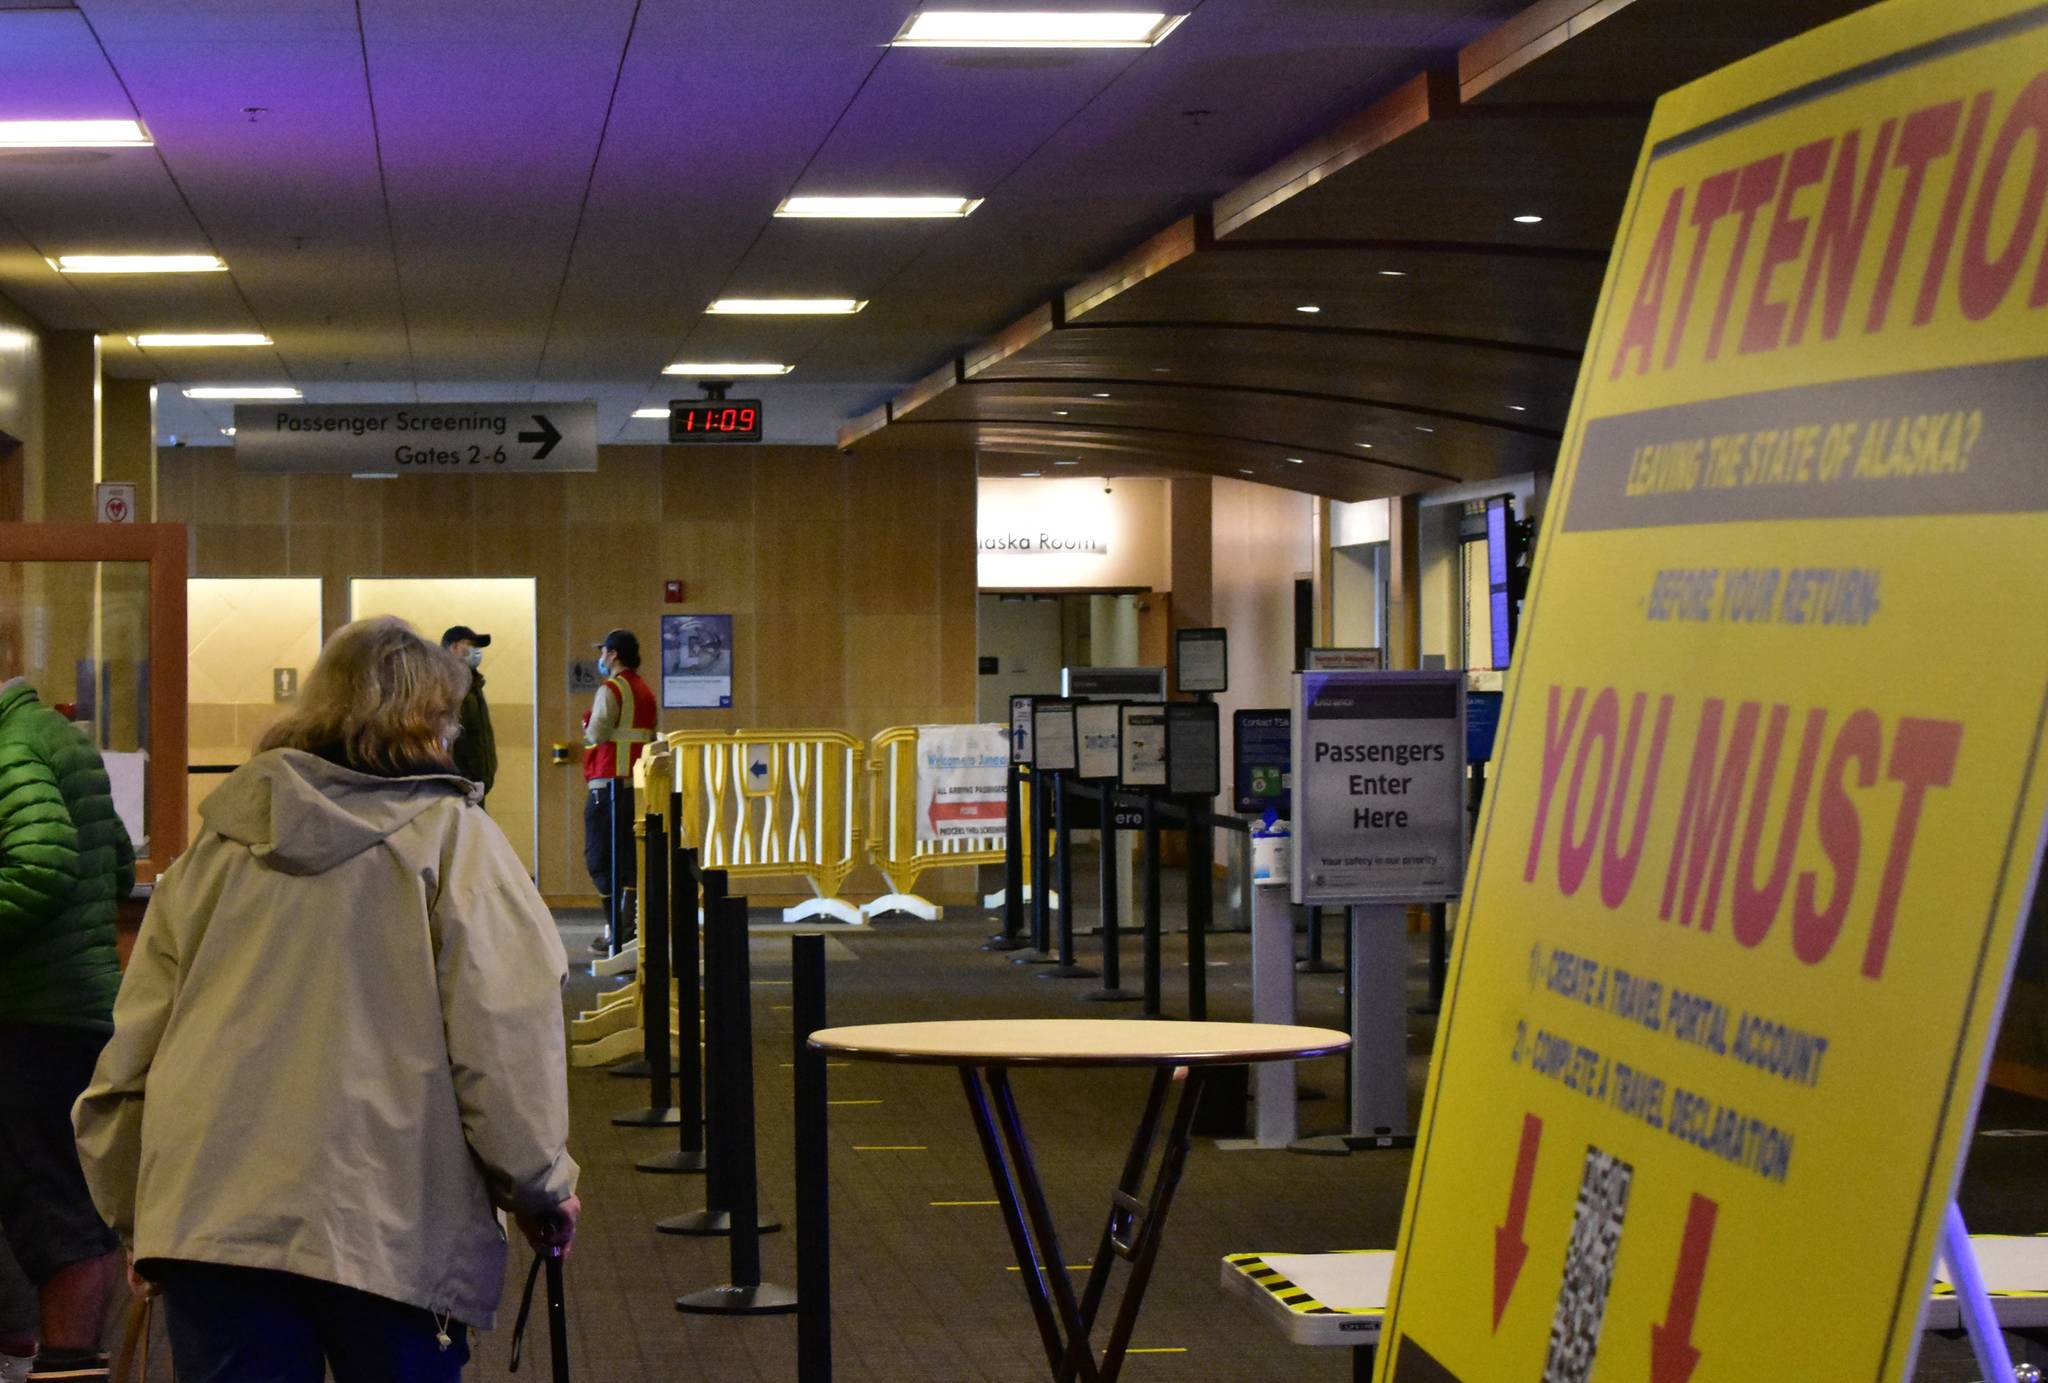 Passengers at the Juneau International Airport make their way past signage notifying the public about the state's travel restrictions on Monday, Nov. 15, 2020. Gov. Mike Dunleavy issued a new emergency declaration which took effect Monday, which outlined a number of travel guidelines for both in-state and out-of-state travel. (Peter Segall / Juneau Empire)